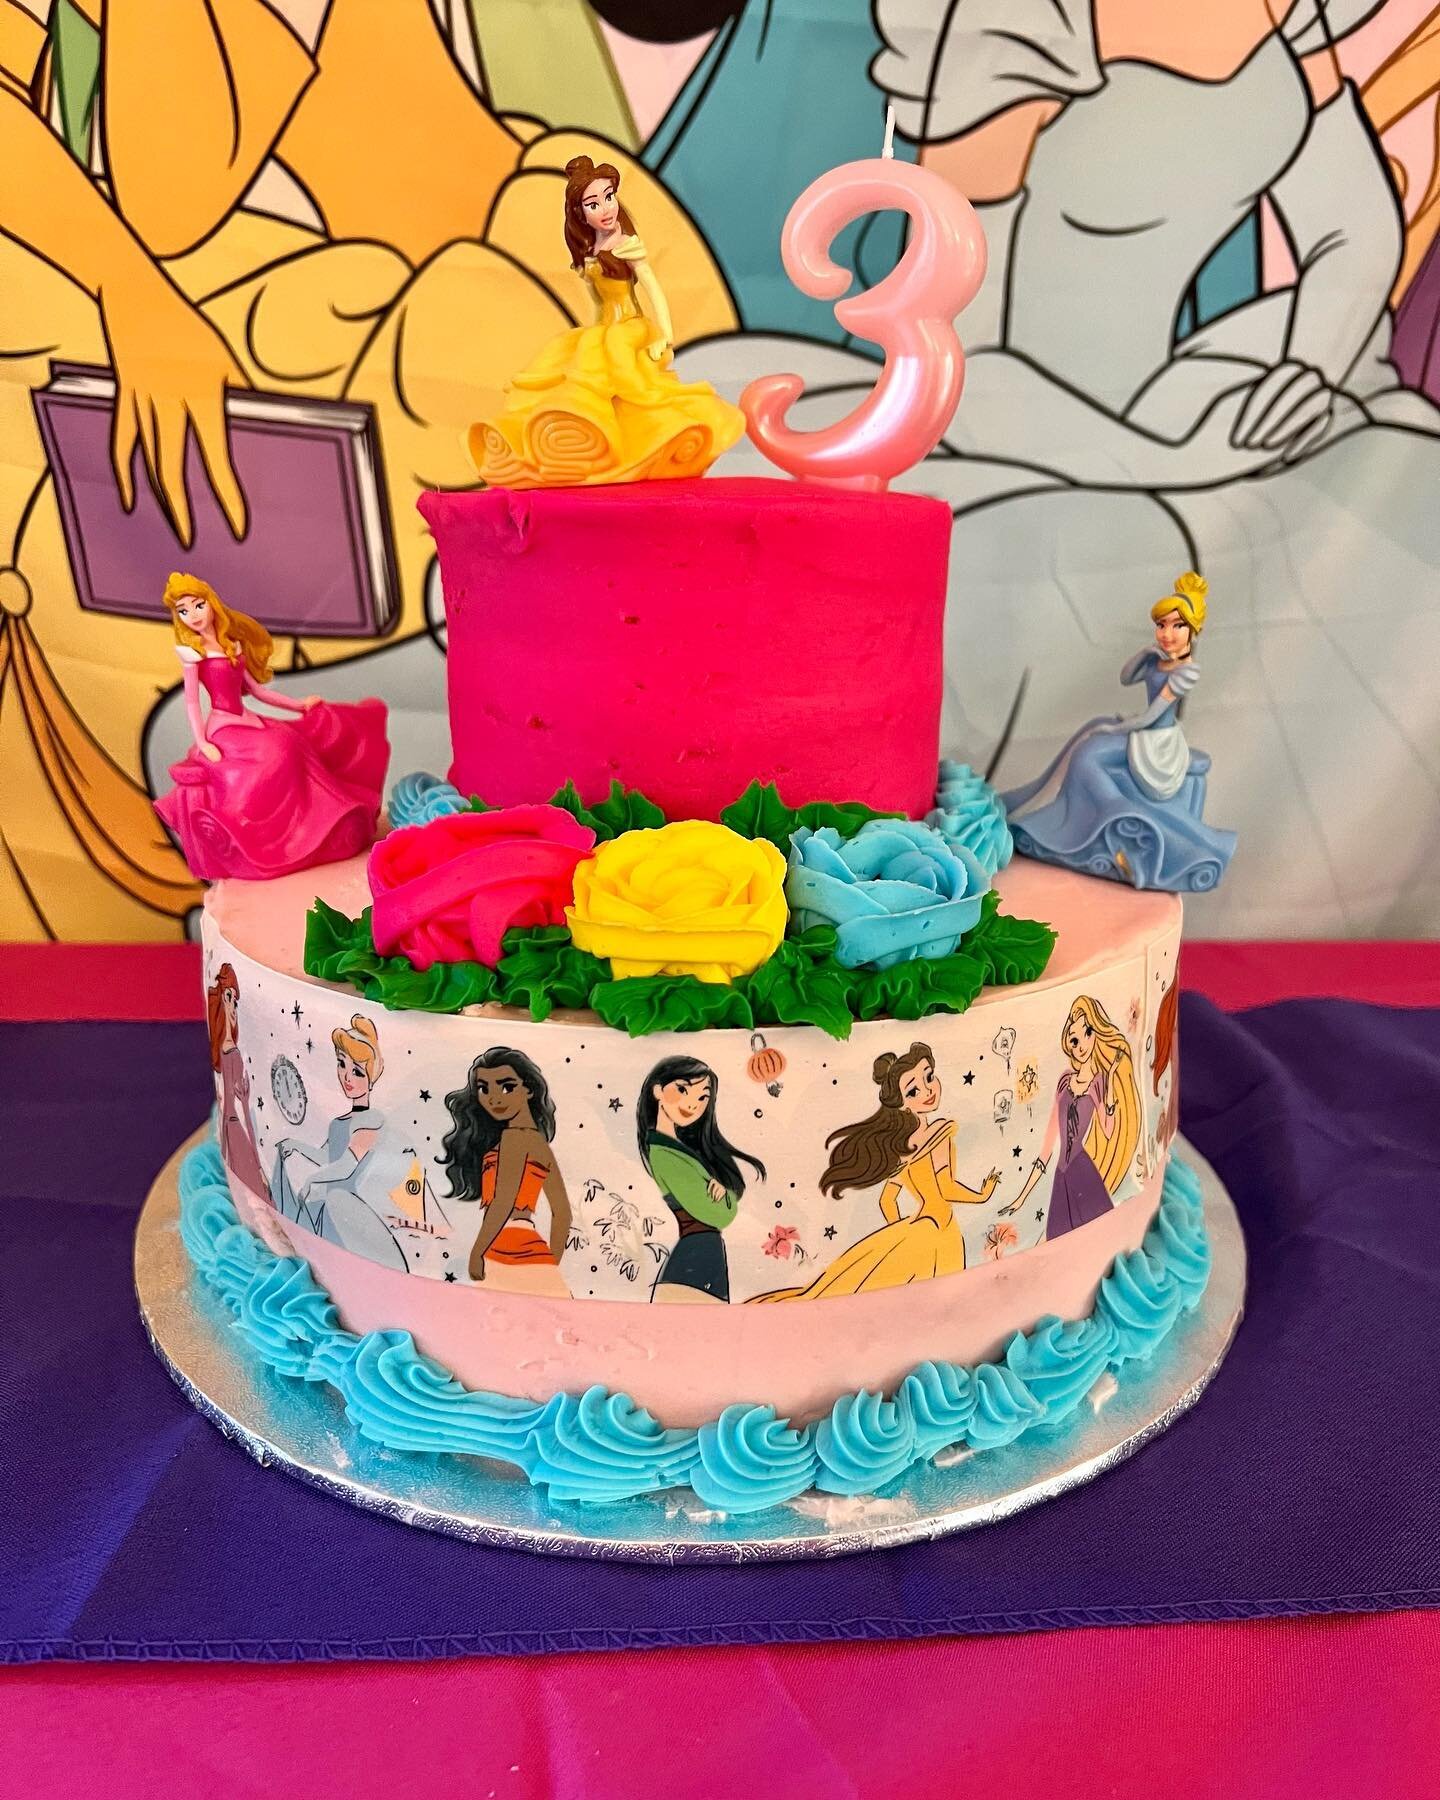 Can you believe this cake is from @samsclub?! I was shocked to find out they had so many character options and can do everything from cupcakes to tiered cakes! This was the perfect princess cake and even came with the figurines! 🩷👑 Super affordable